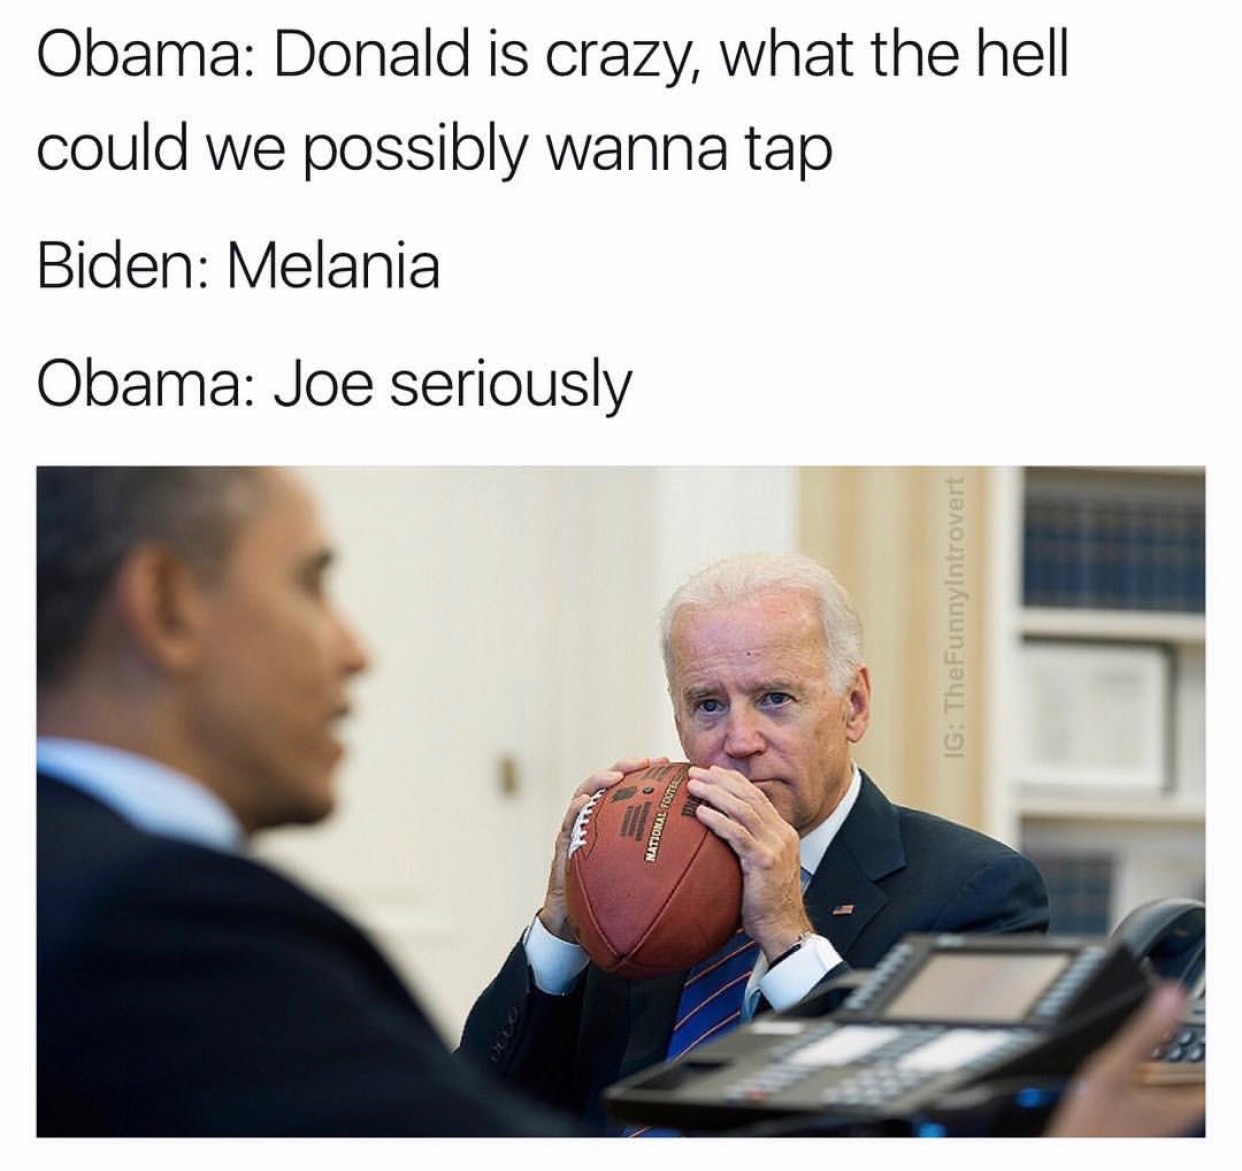 joe biden memes trump - Obama Donald is crazy, what the hell could we possibly wanna tap Biden Melania Obama Joe seriously Ig The FunnyIntrovert Villoj Tvrollyn